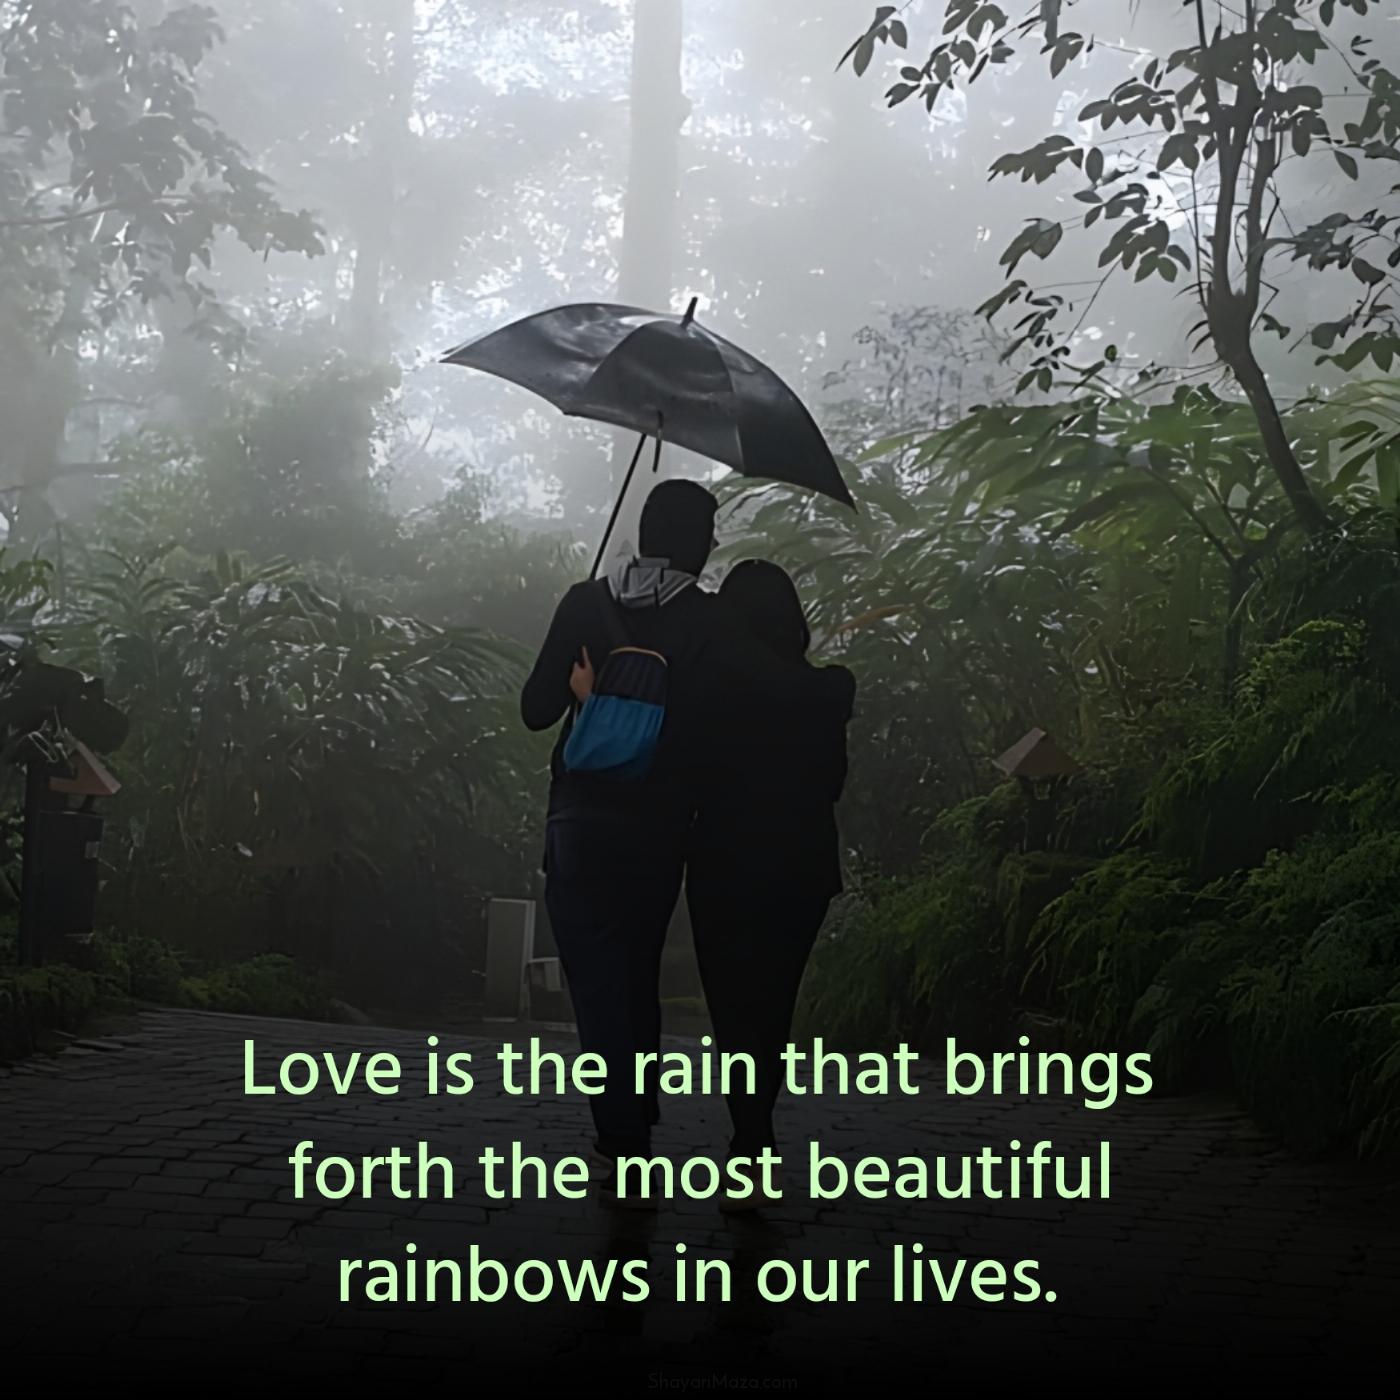 Love is the rain that brings forth the most beautiful rainbows